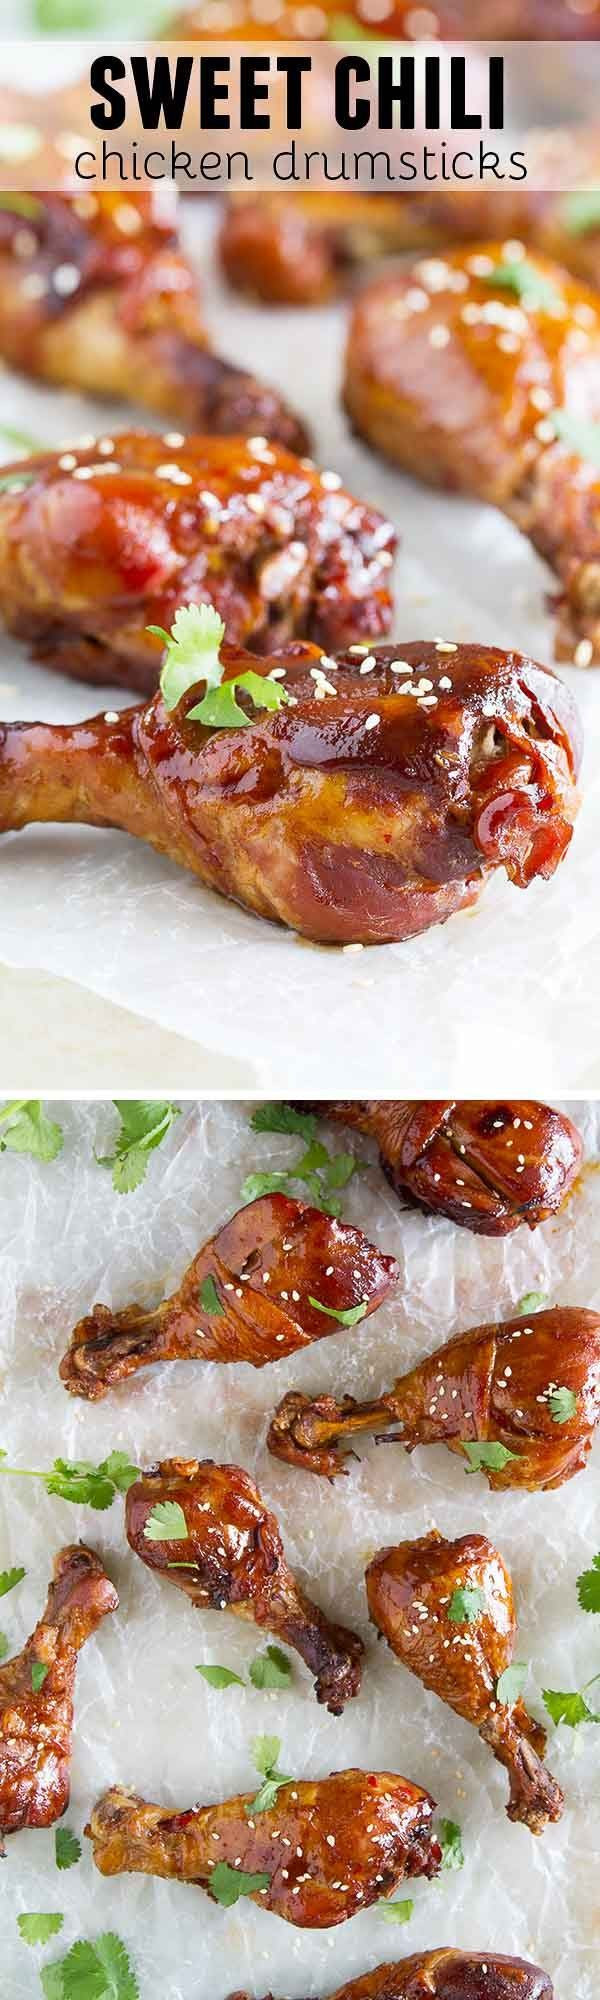 Healthy Chicken Drumstick Slow Cooker Recipes
 Slow Cooker Sweet Chili Chicken Drumsticks